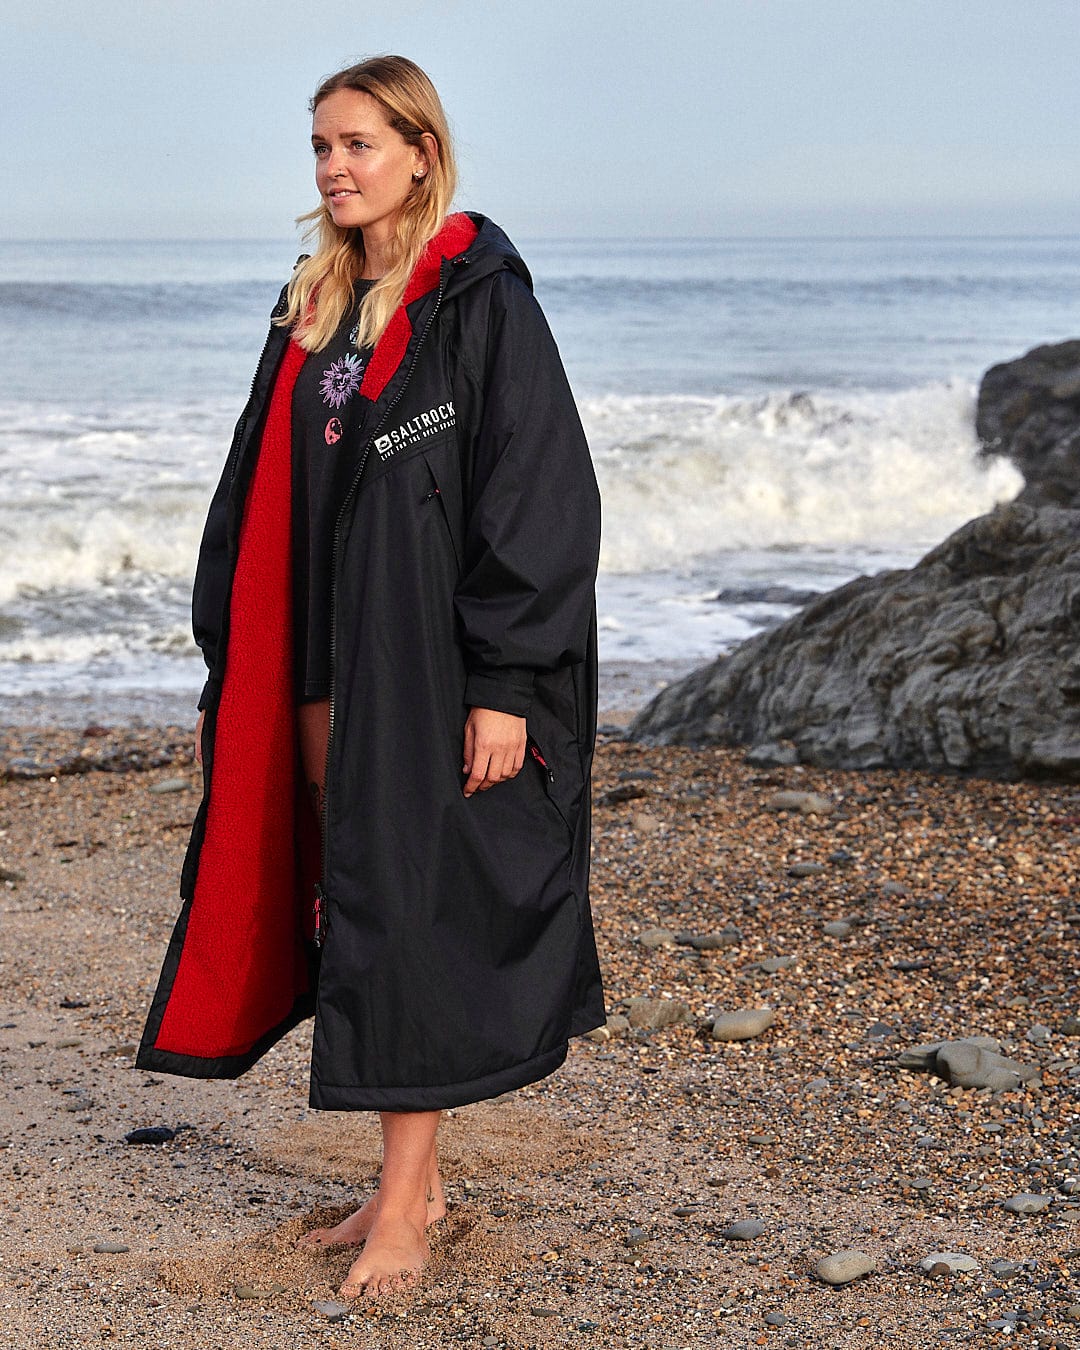 A woman wearing a Saltrock Four Seasons - Waterproof Changing Robe in black and red, standing on a beach.